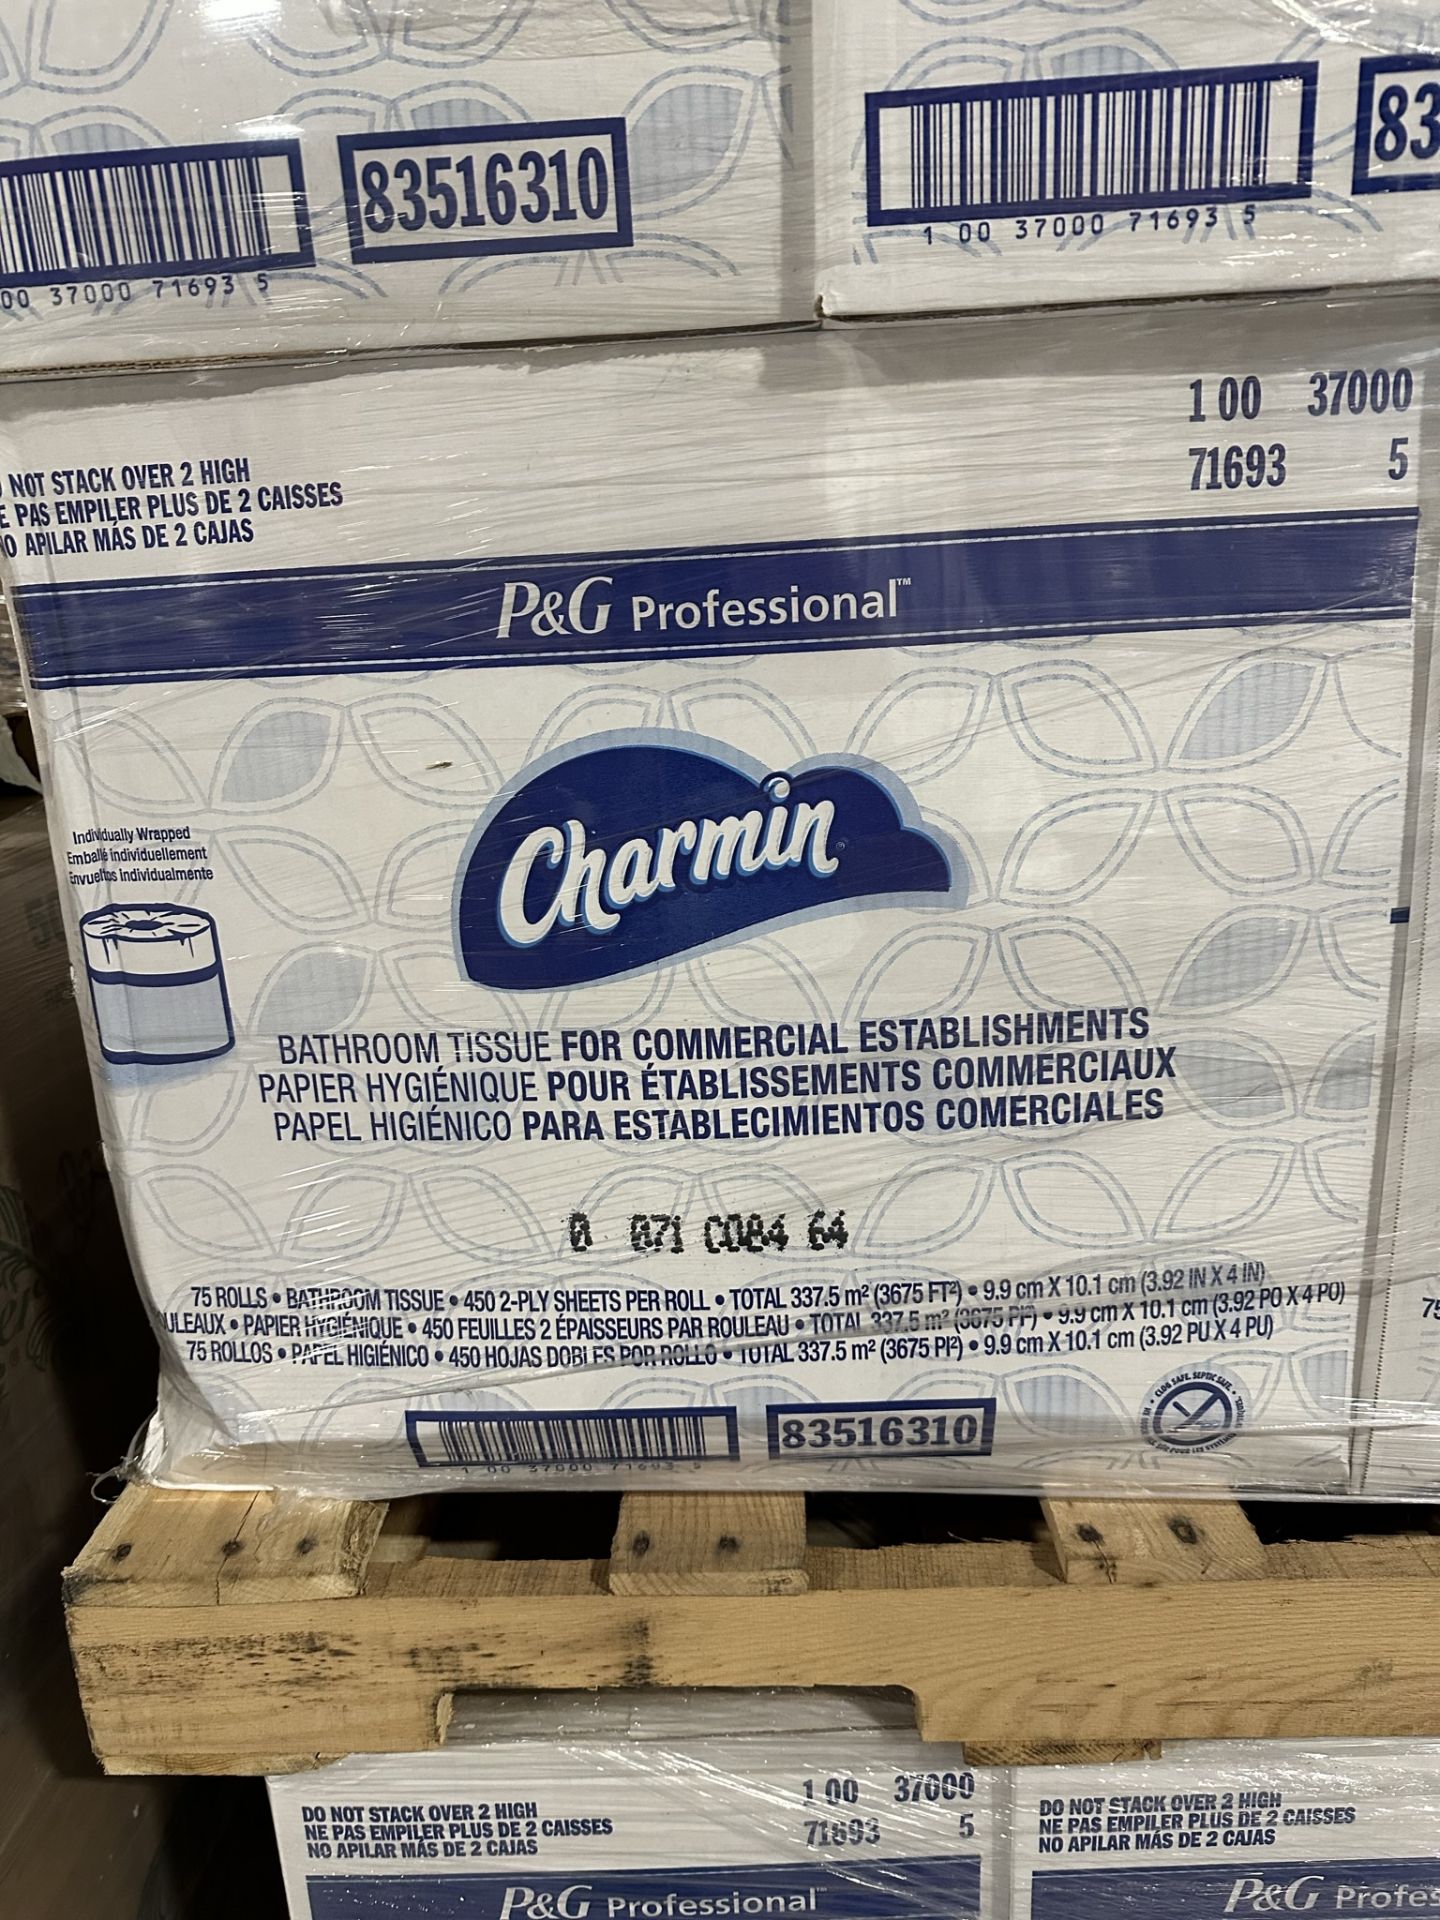 Lot of (20) Cases of Charmin P&G Professional 2 Ply Bath Tissue Rolls - Image 2 of 2